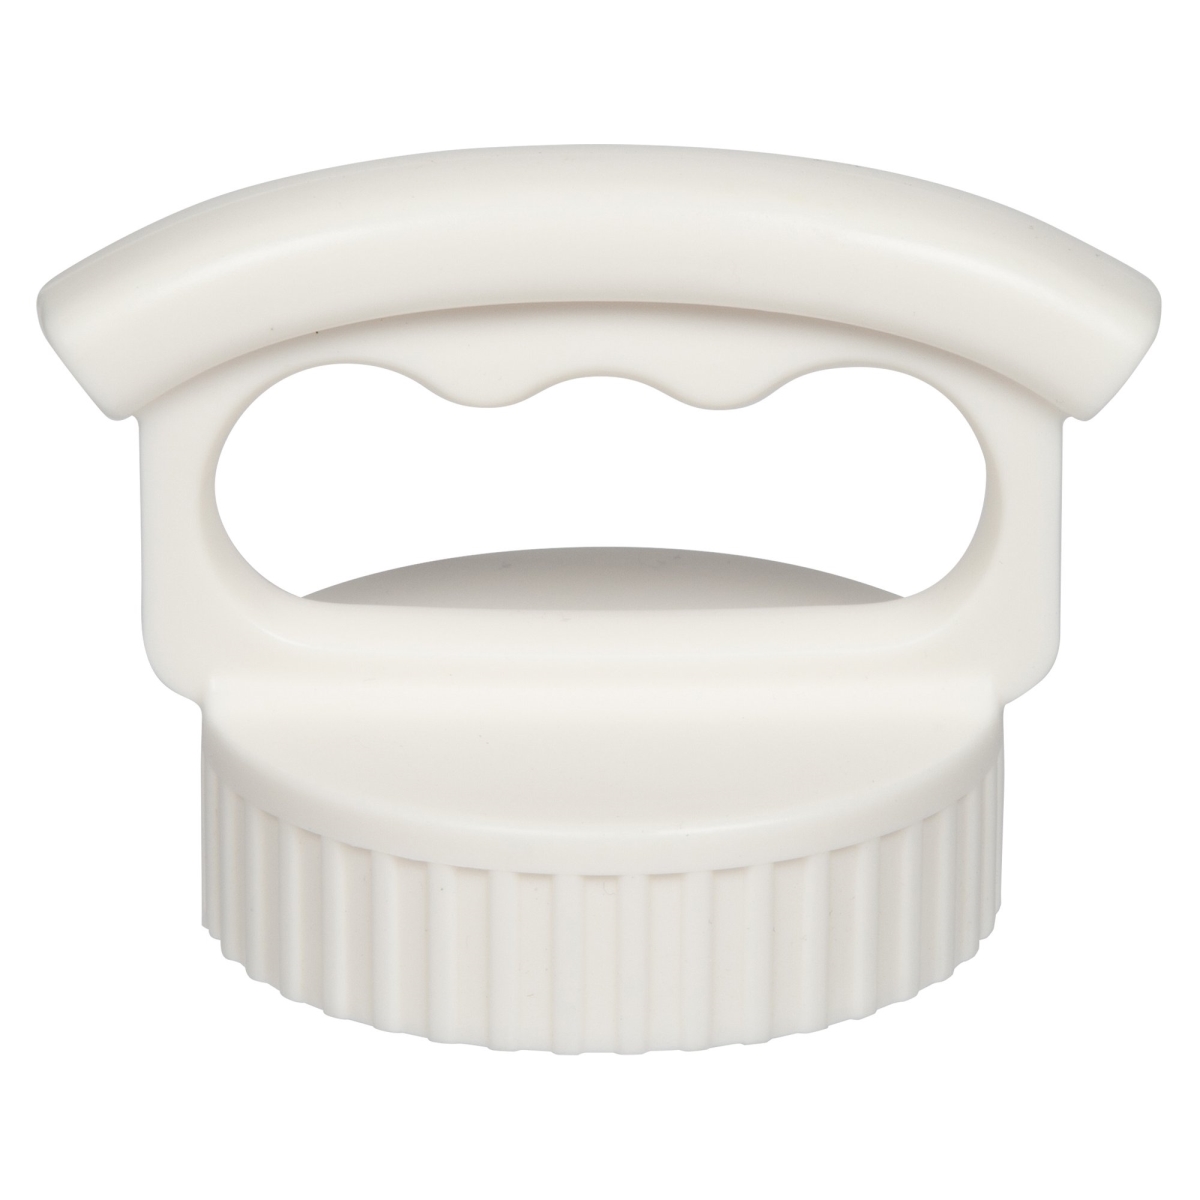 A45003wh0 Fifty & Fifty 3 Finger Caps, Winter White